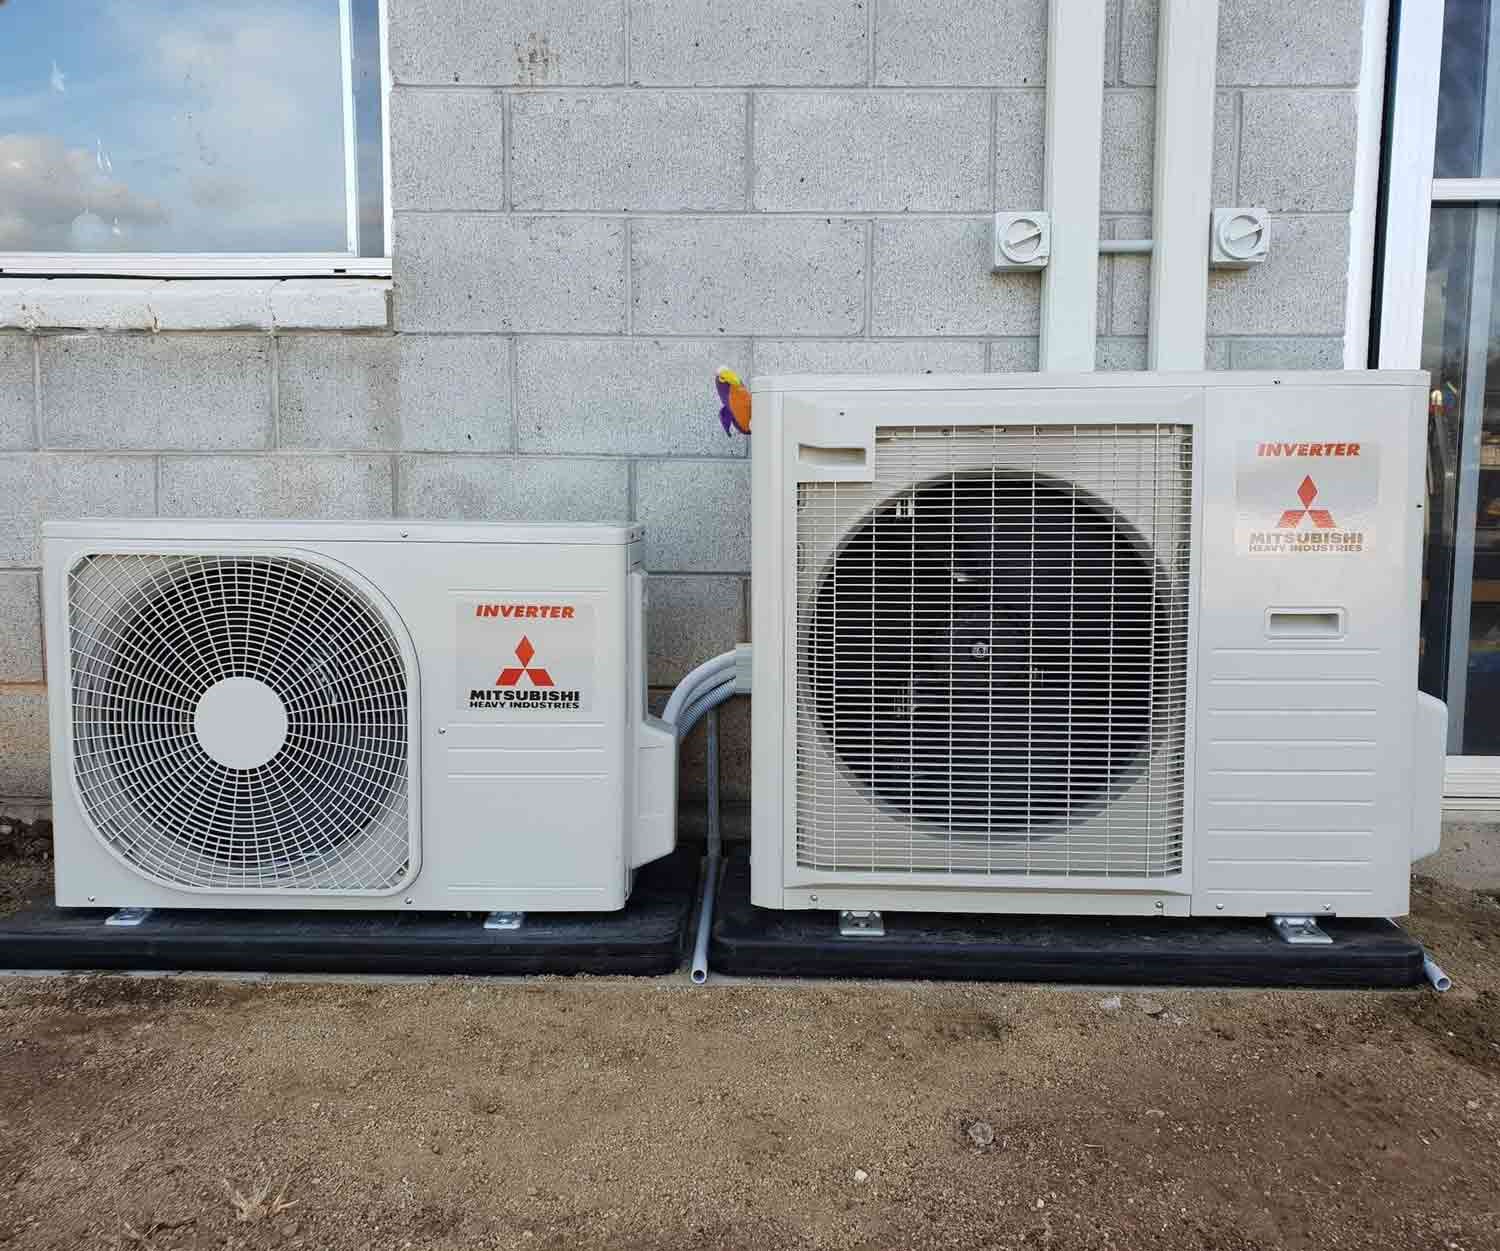 Mitsubishi Inverter — Mick’s Air-Conditioning Services in Gracemere, QLD